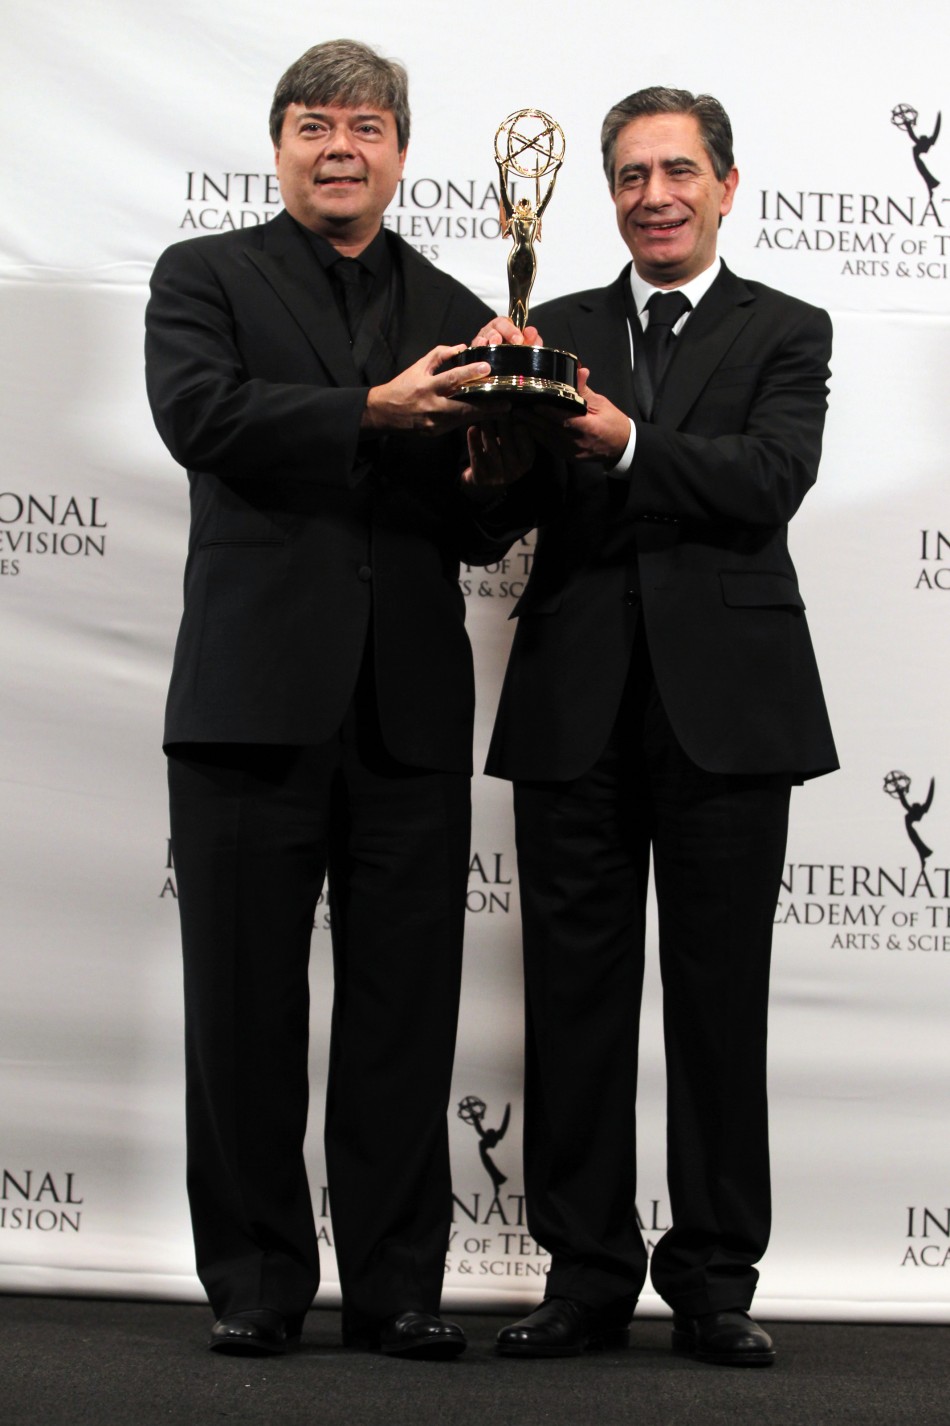 Telenovela award winners Bokel and Marques pose for photographers at the International Emmy Awards